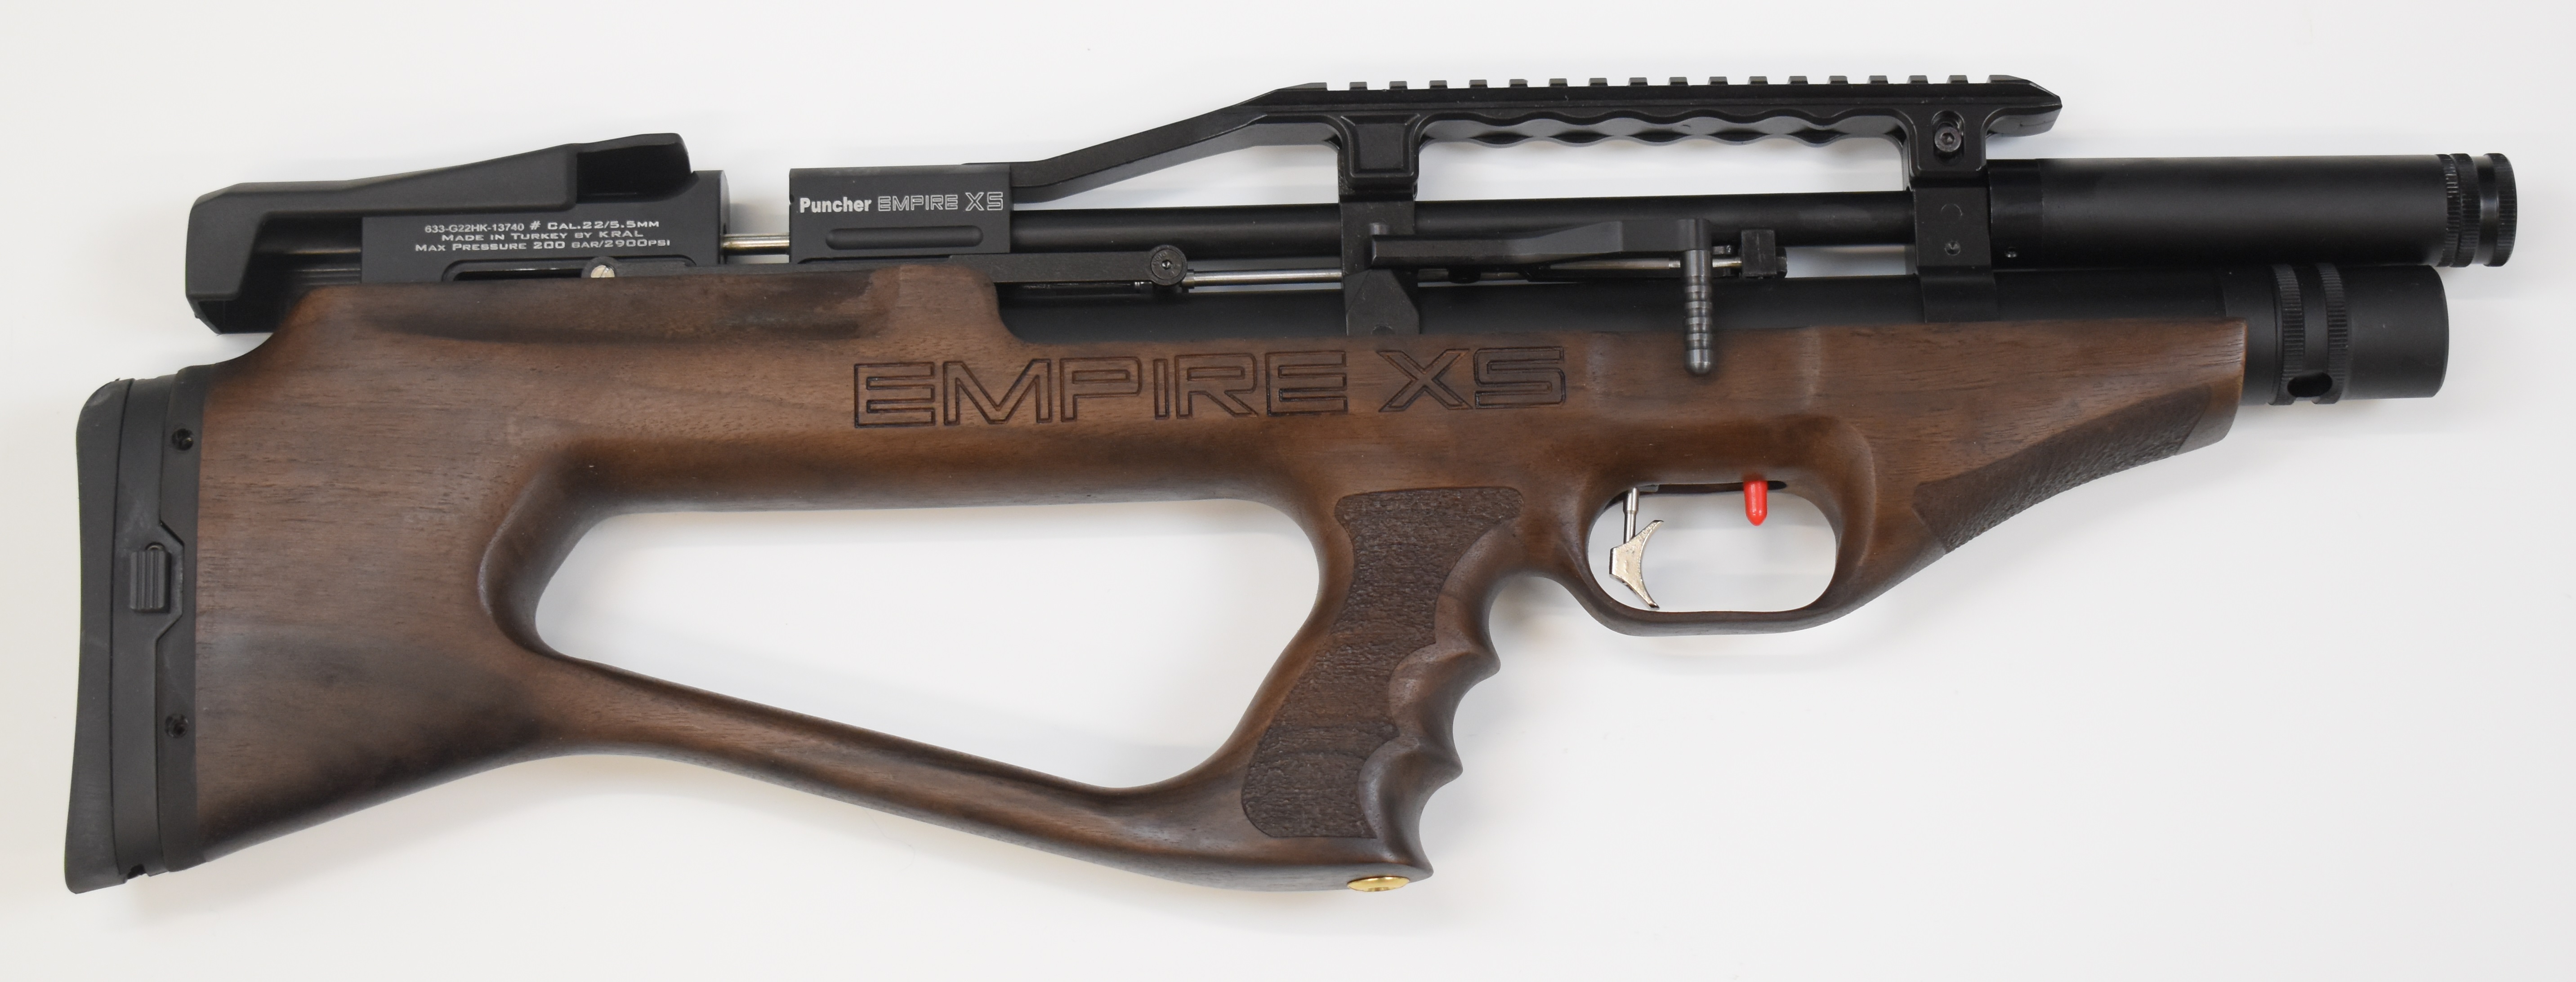 Kral Puncher Empire XS .22 PCP carbine air rifle with textured pistol grip, two 14-shot magazines - Image 2 of 9